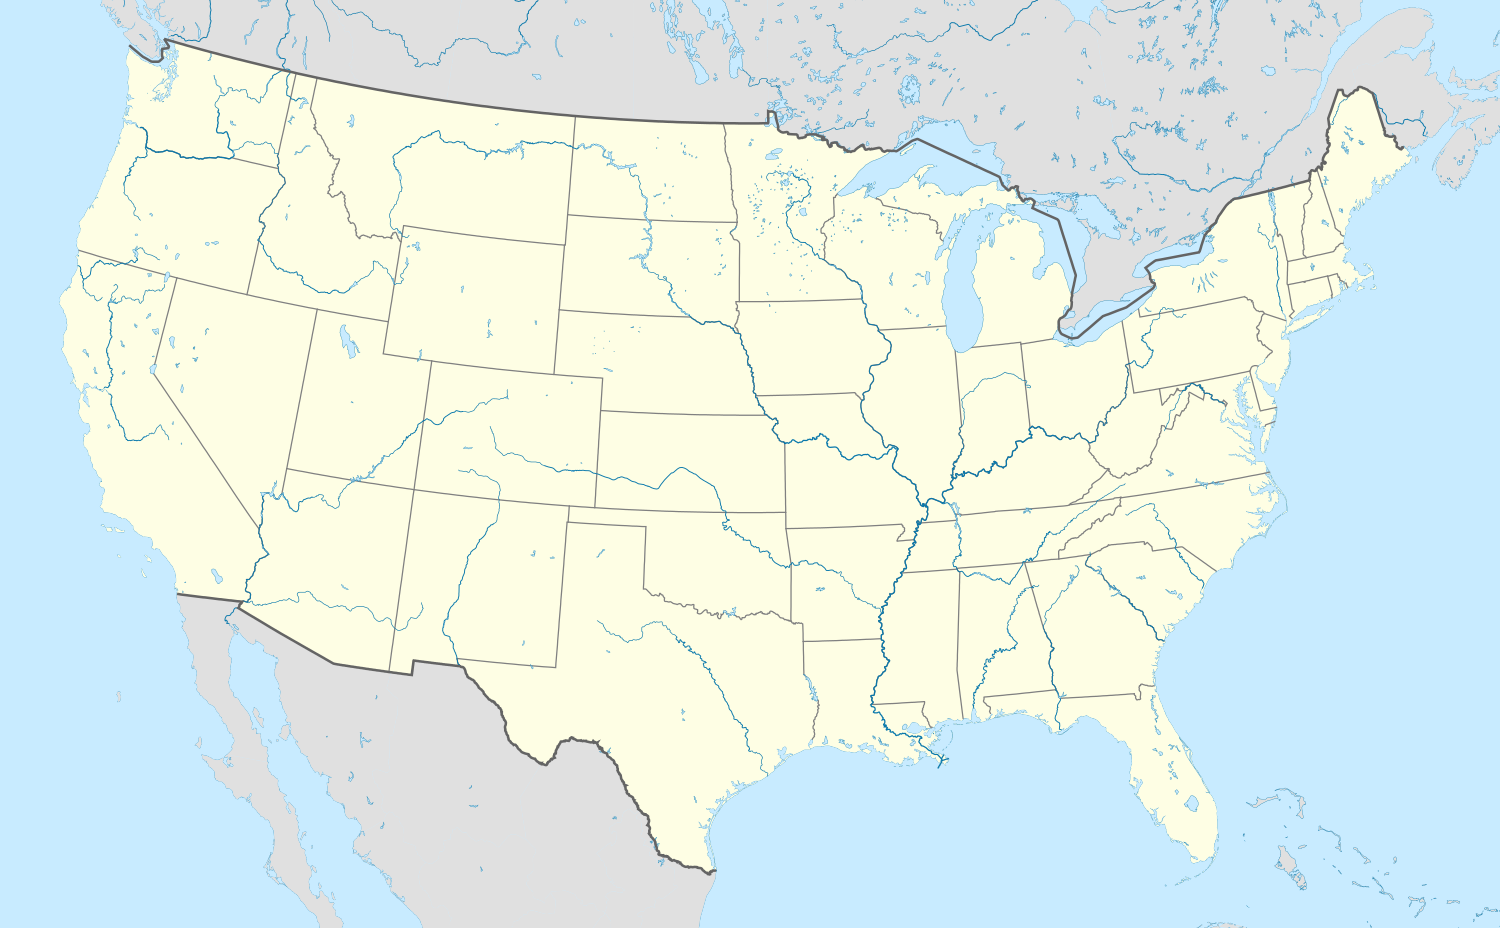 JonBroxton is located in the United States